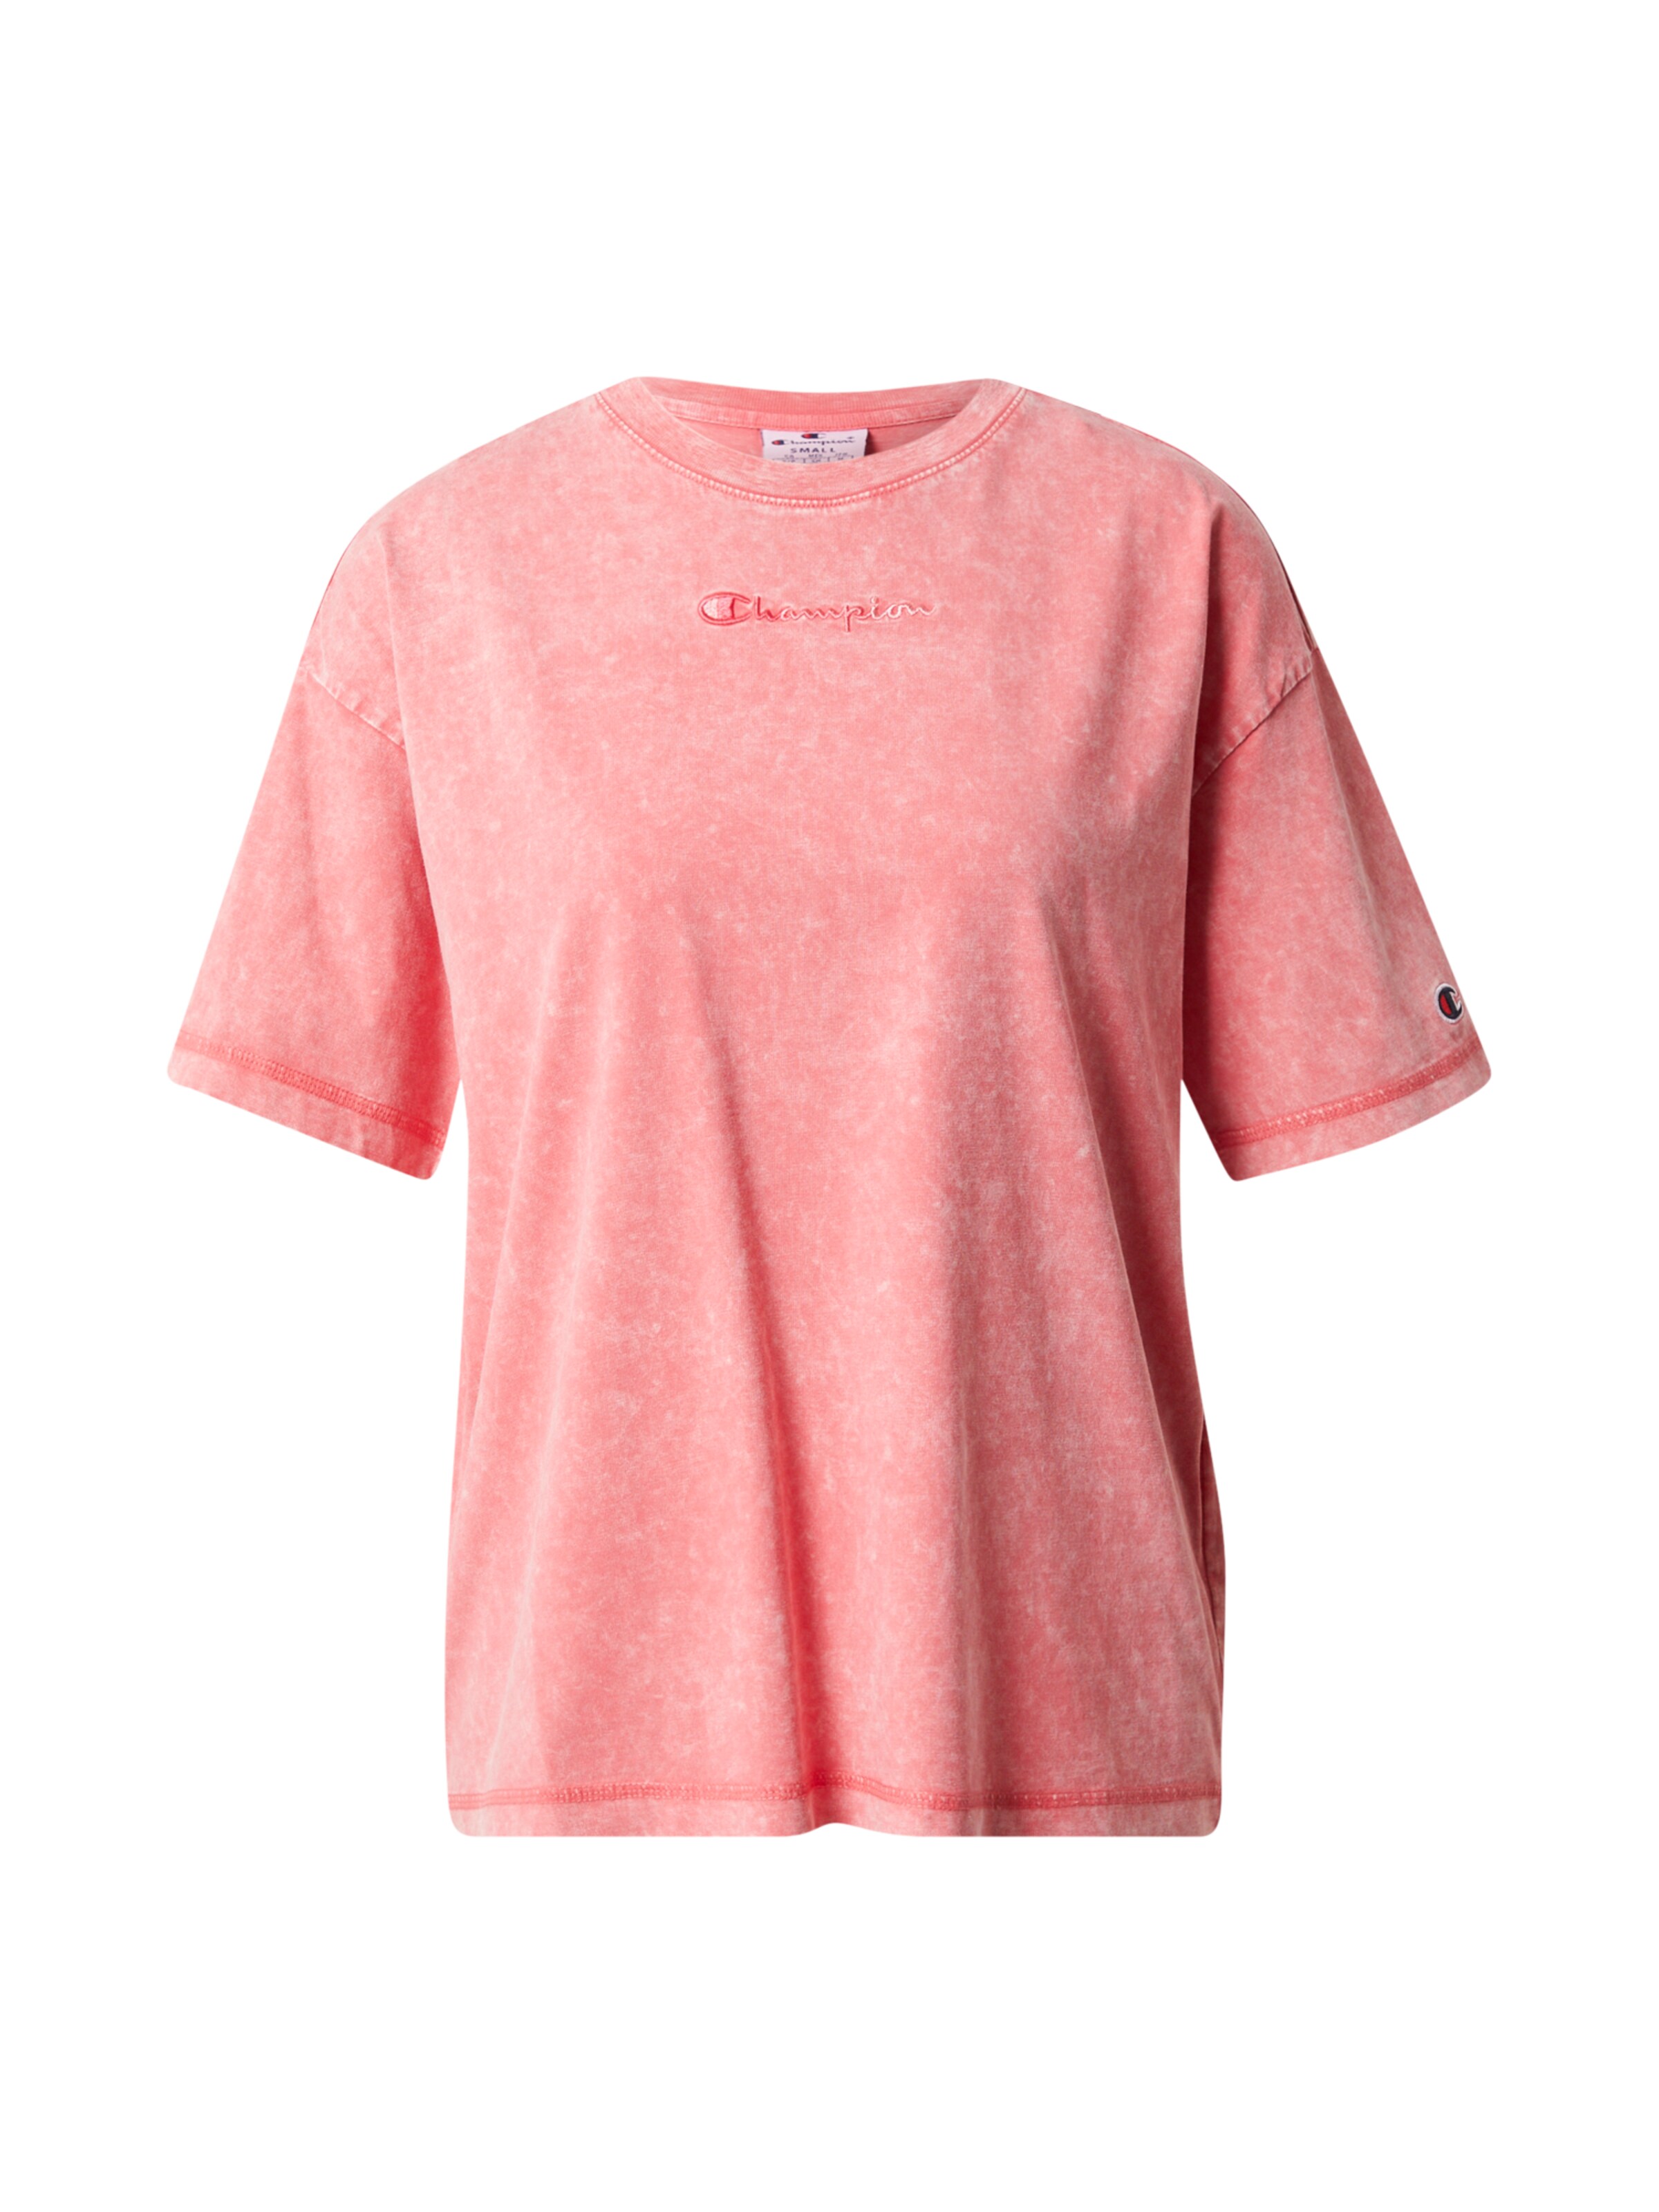 Frauen Shirts & Tops Champion Authentic Athletic Apparel T-Shirt in Pink - GJ27412